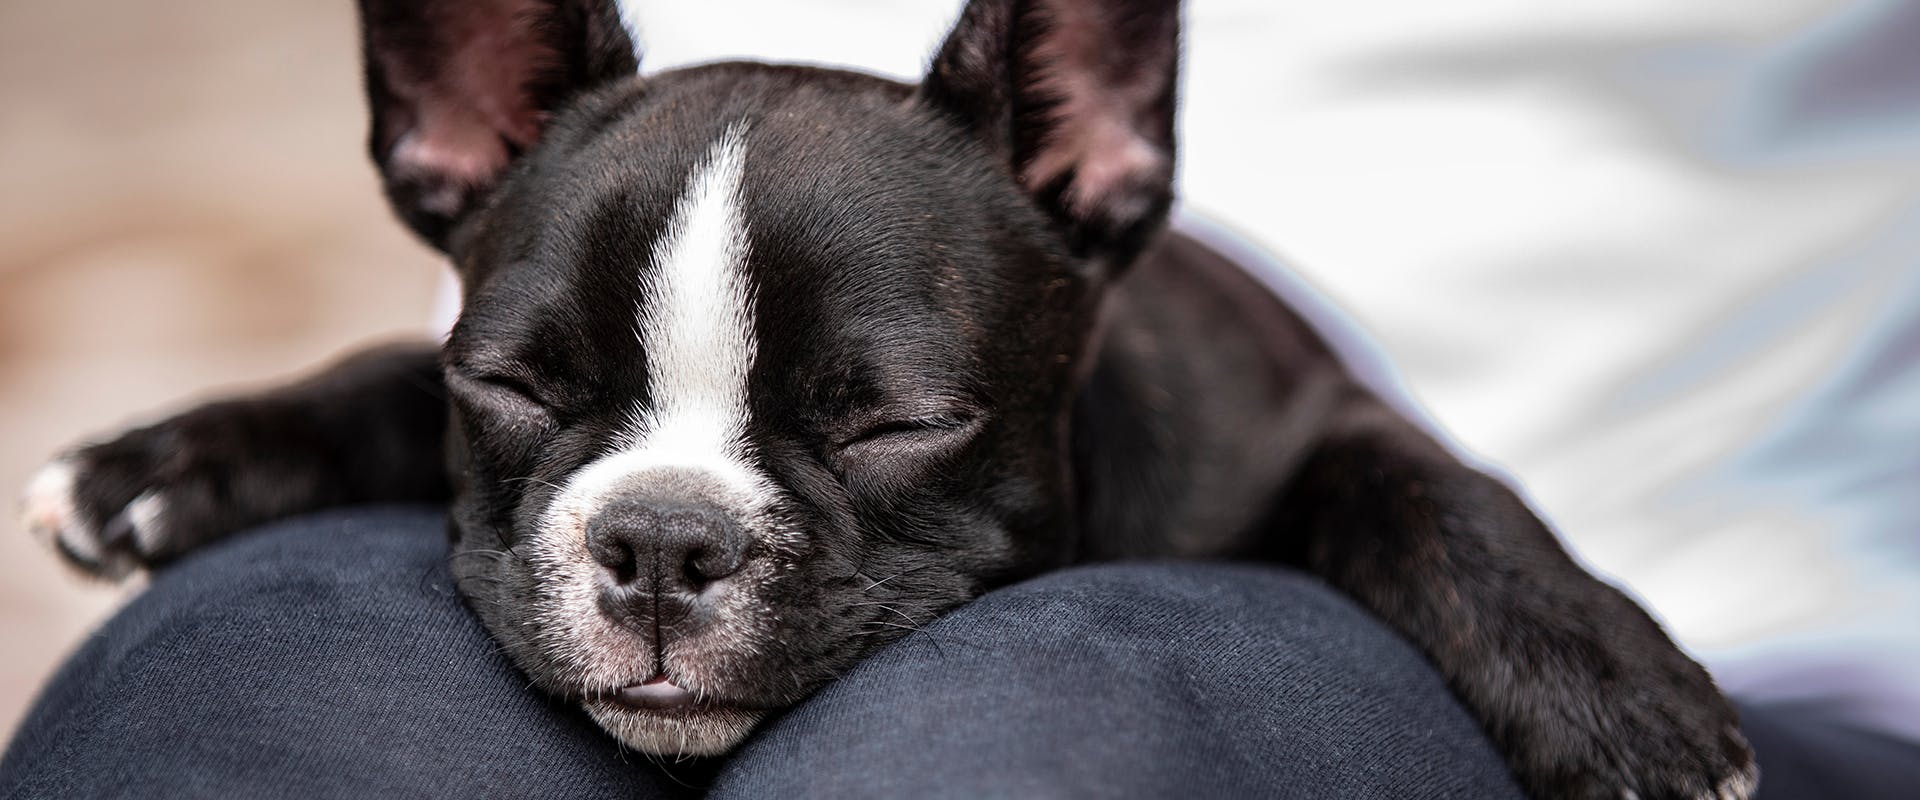 A small Boston Terrier puppy sleeping on a person's lap